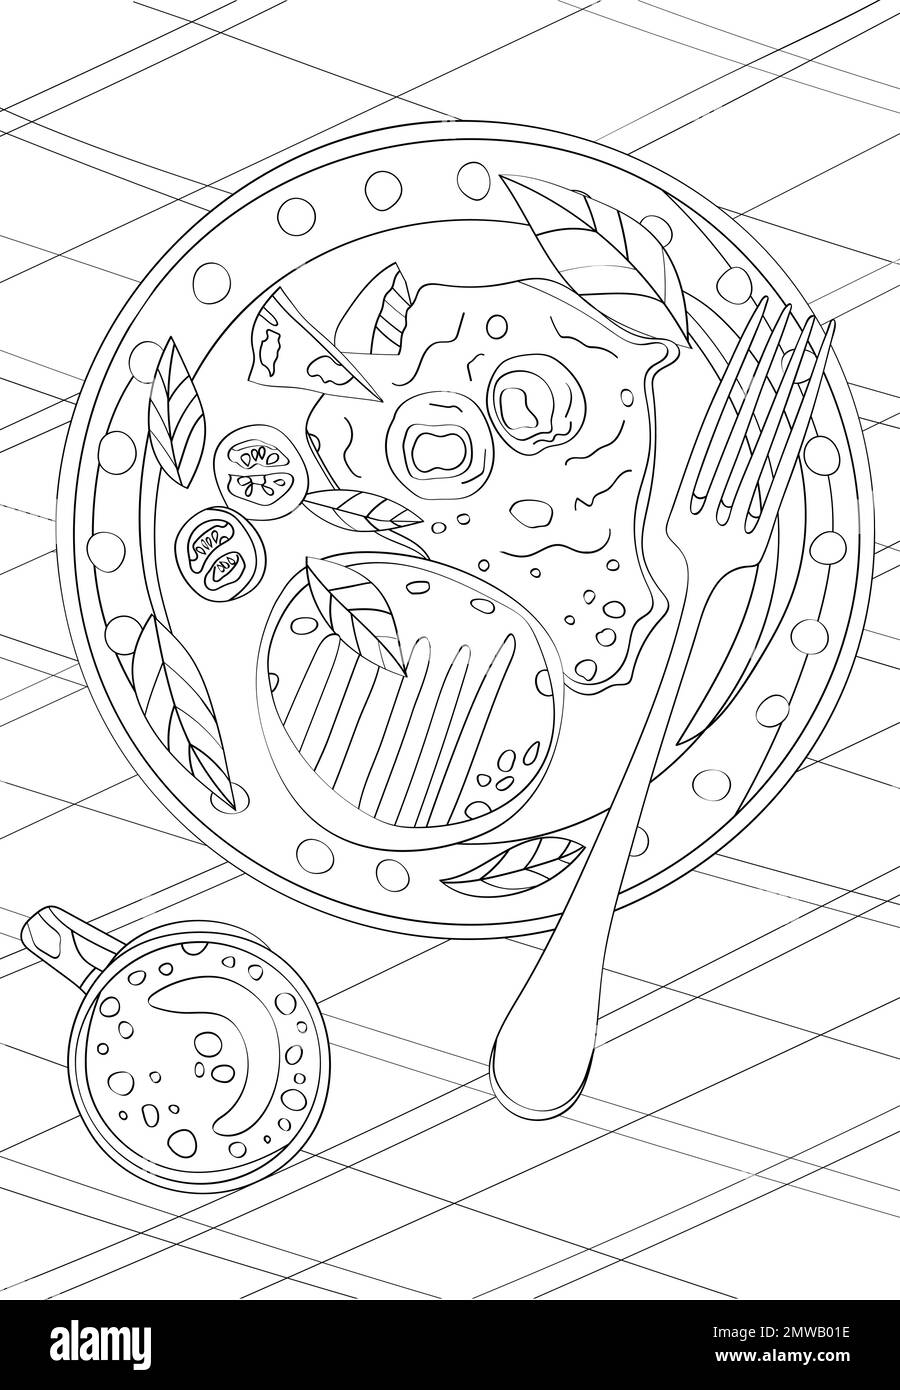 267,200 Adult Coloring Pages Images, Stock Photos, 3D objects, & Vectors